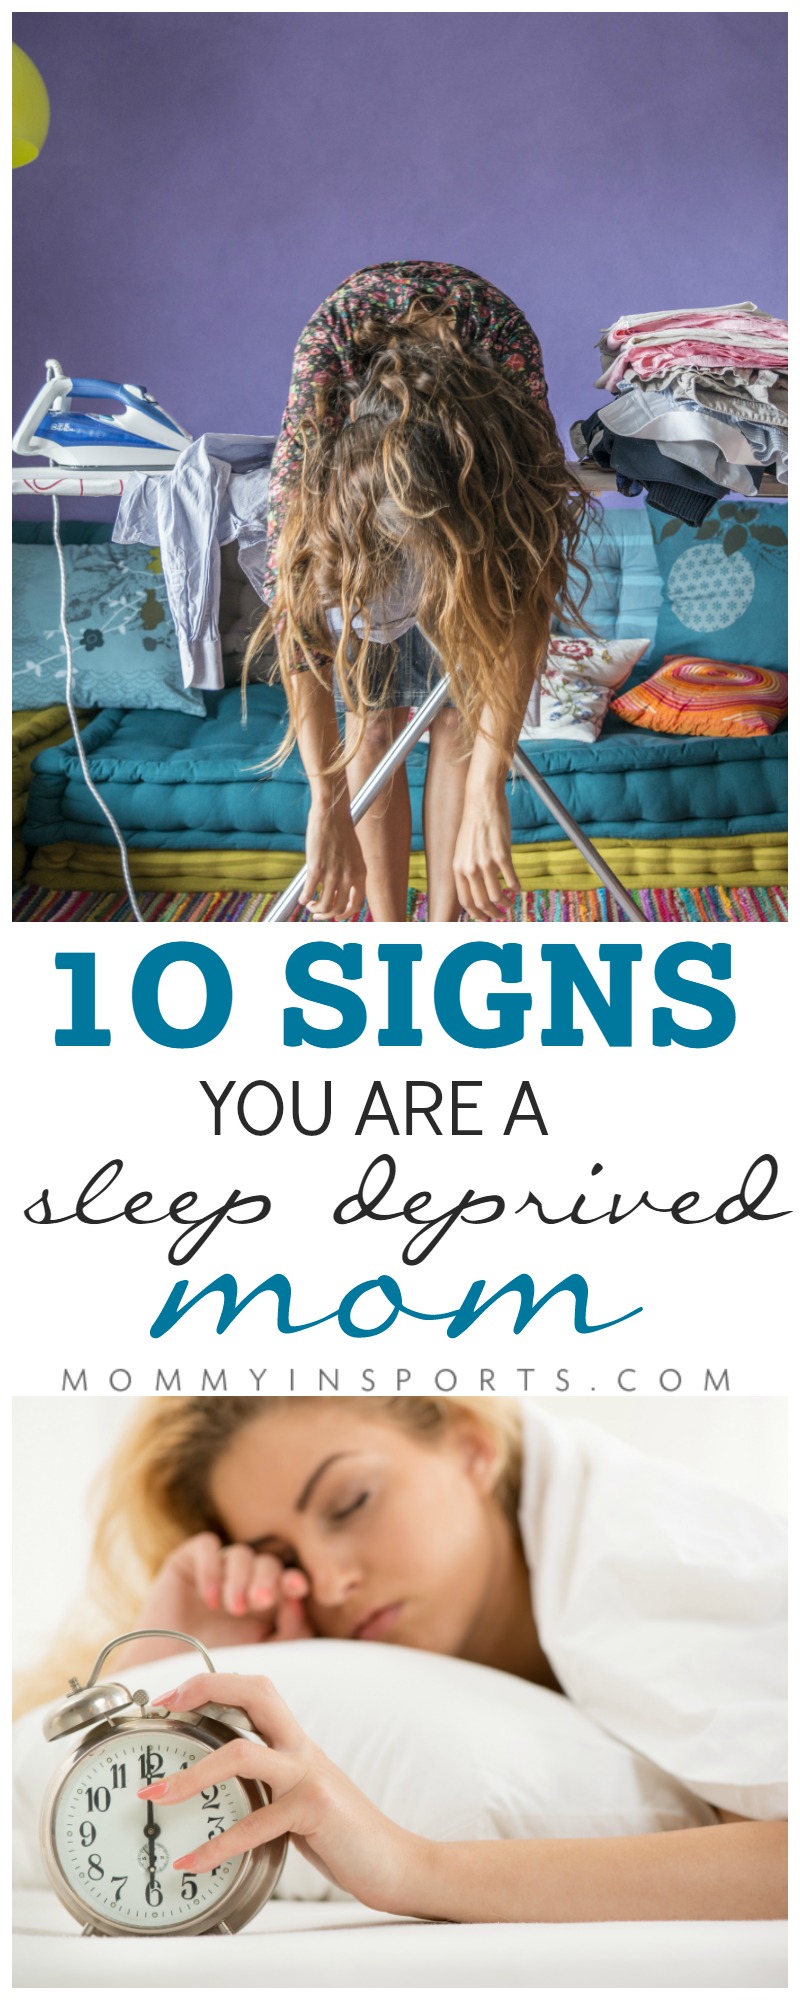 Ever wonder how that orange juice was poured in your cereal? Check out the 10 signs you are a sleep deprived mom, and enjoy a cup of coffee!